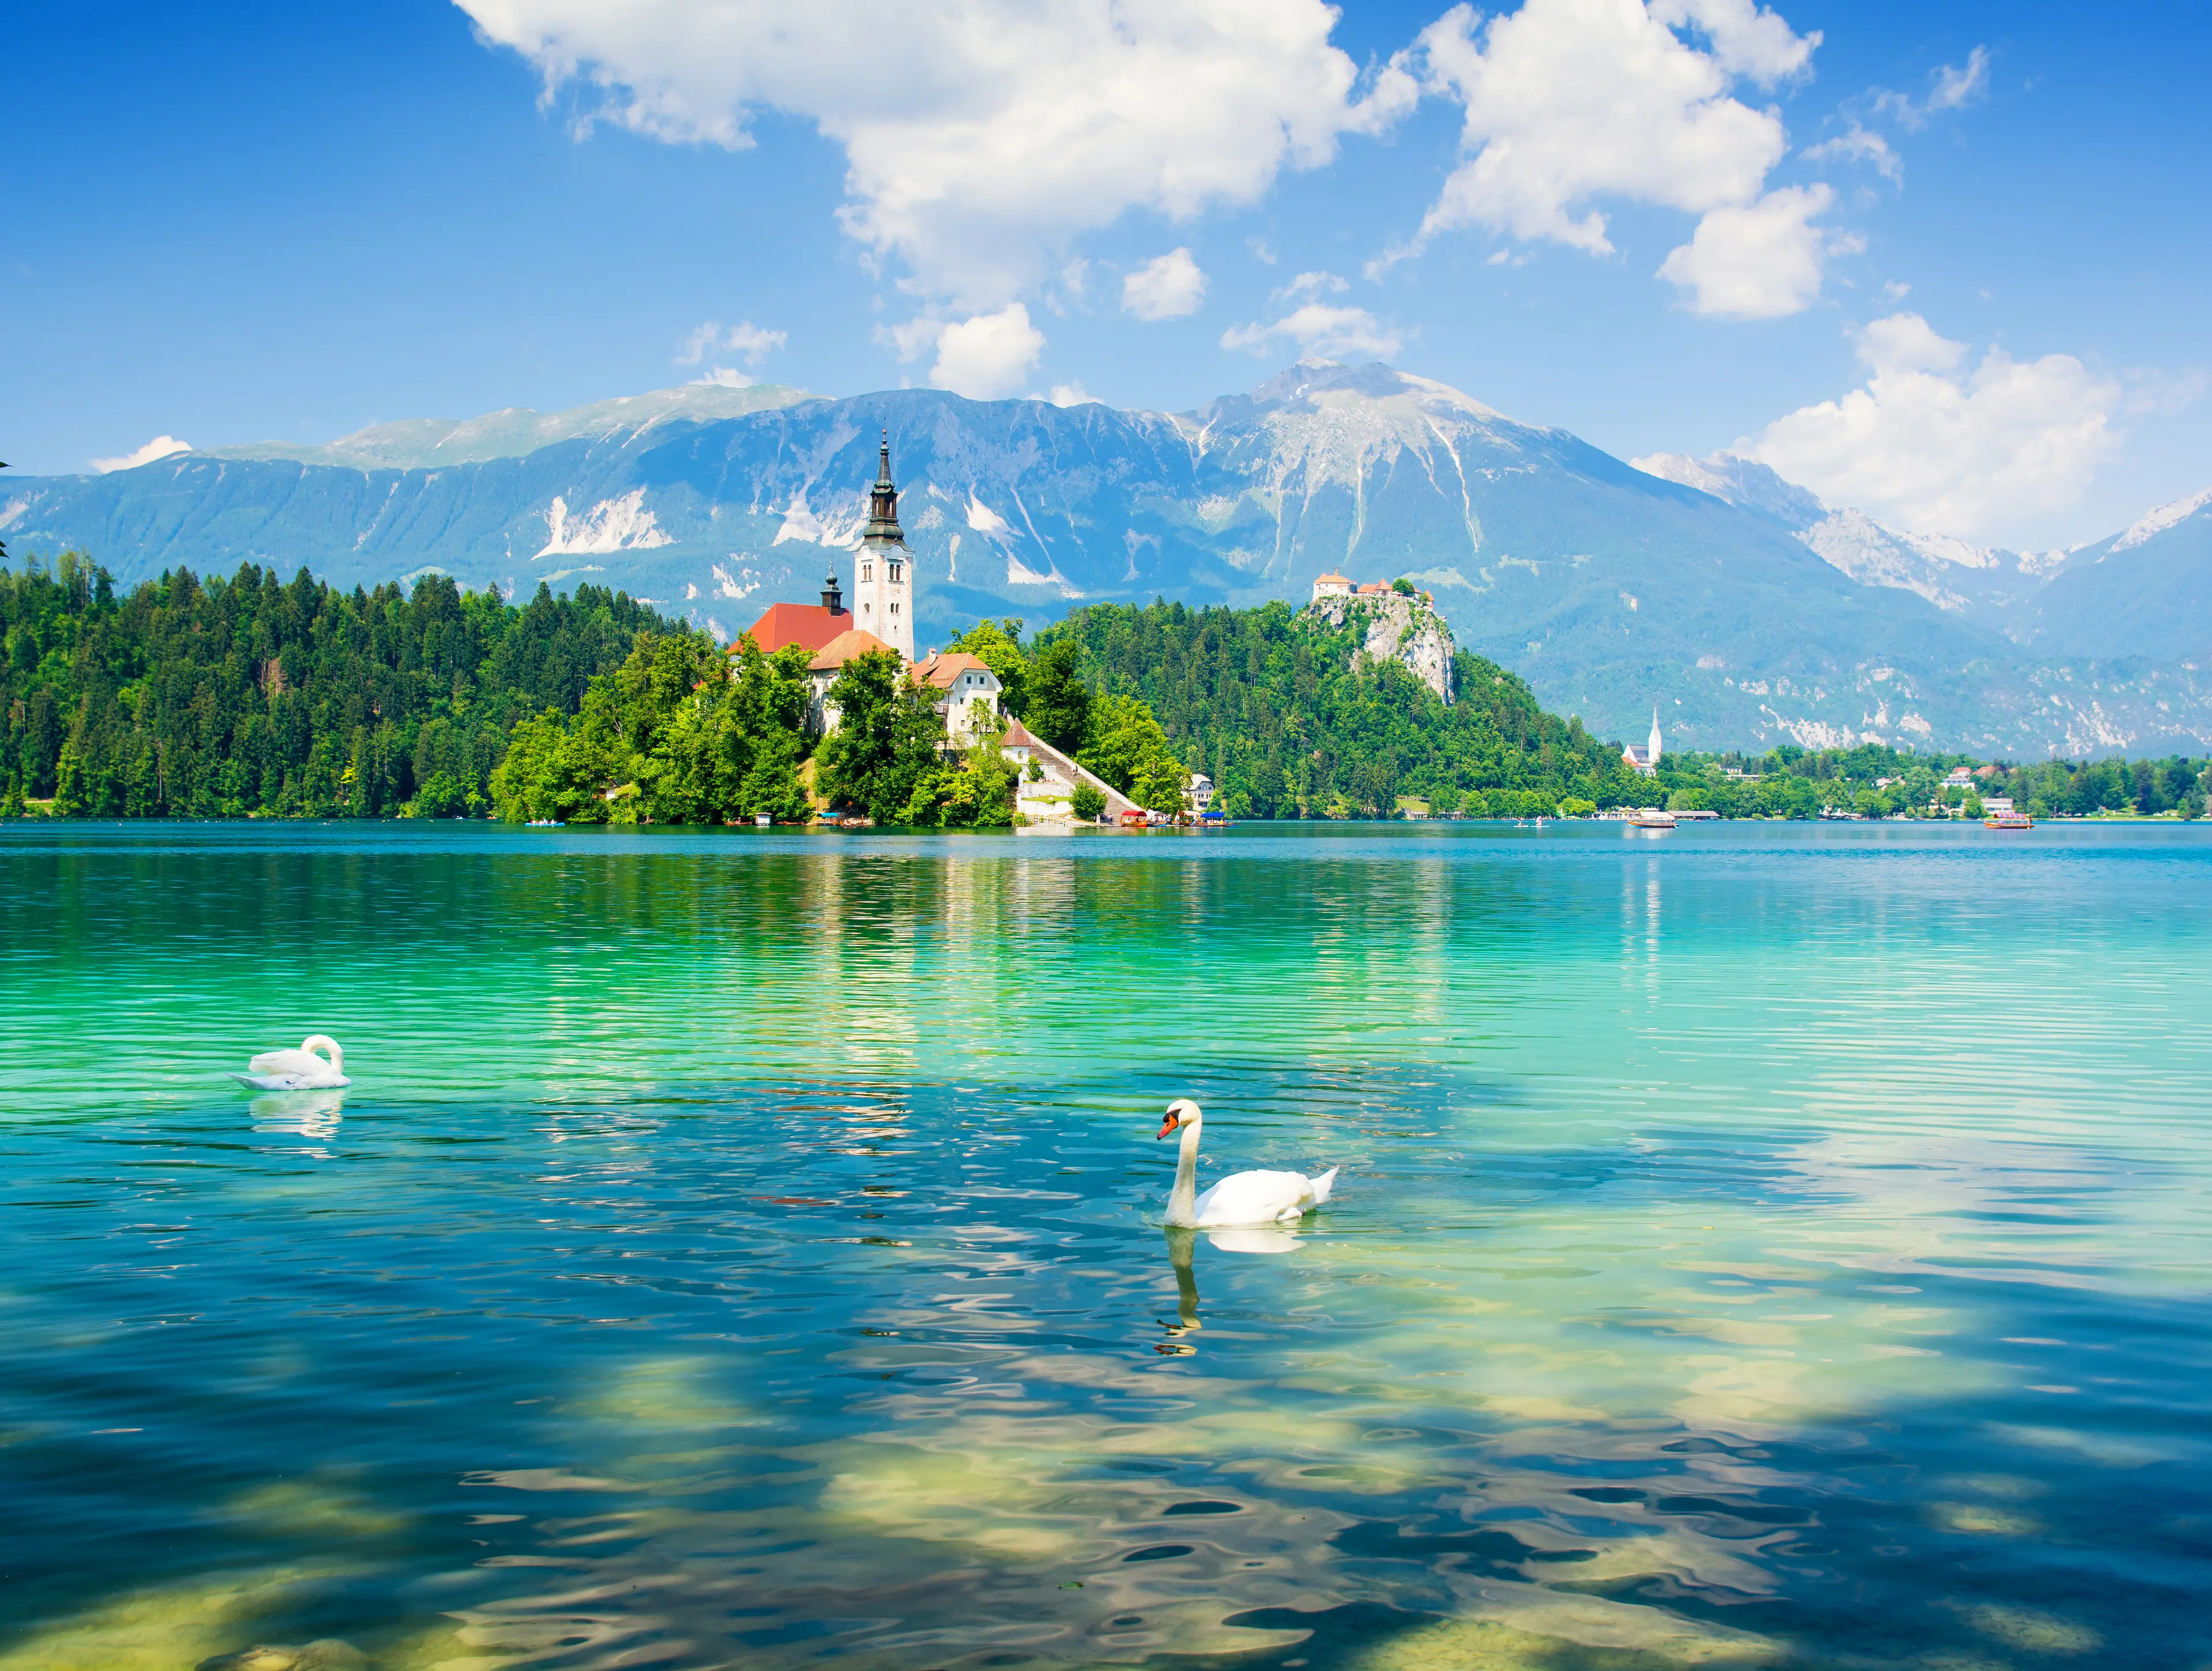 2-Day Local Experience: Food, Wine & Sights at Lake Bled